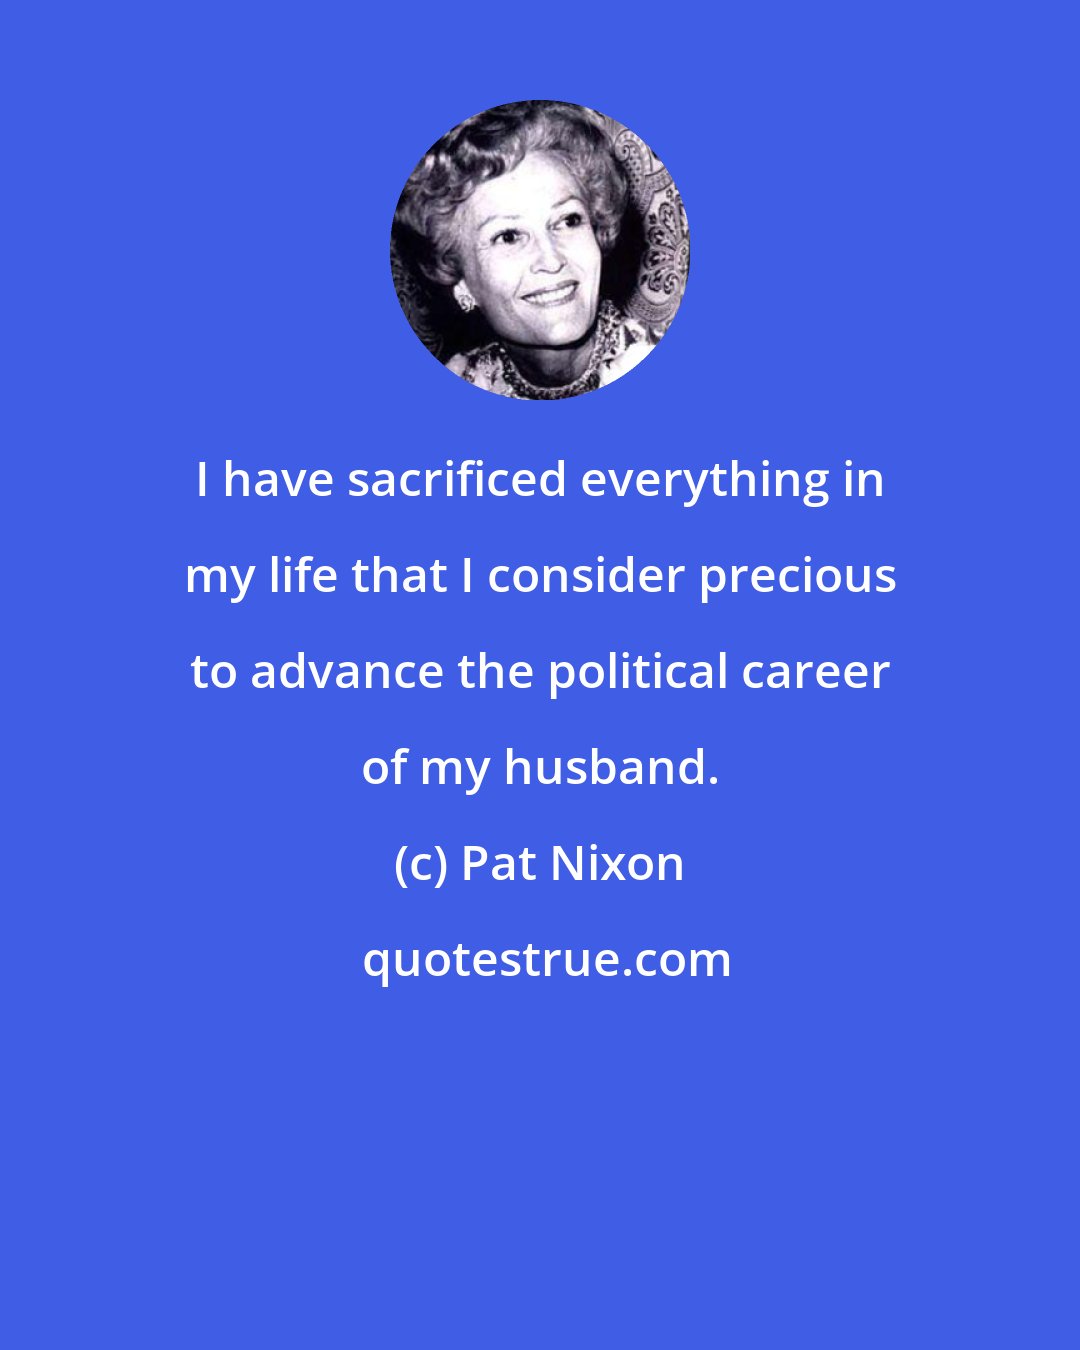 Pat Nixon: I have sacrificed everything in my life that I consider precious to advance the political career of my husband.